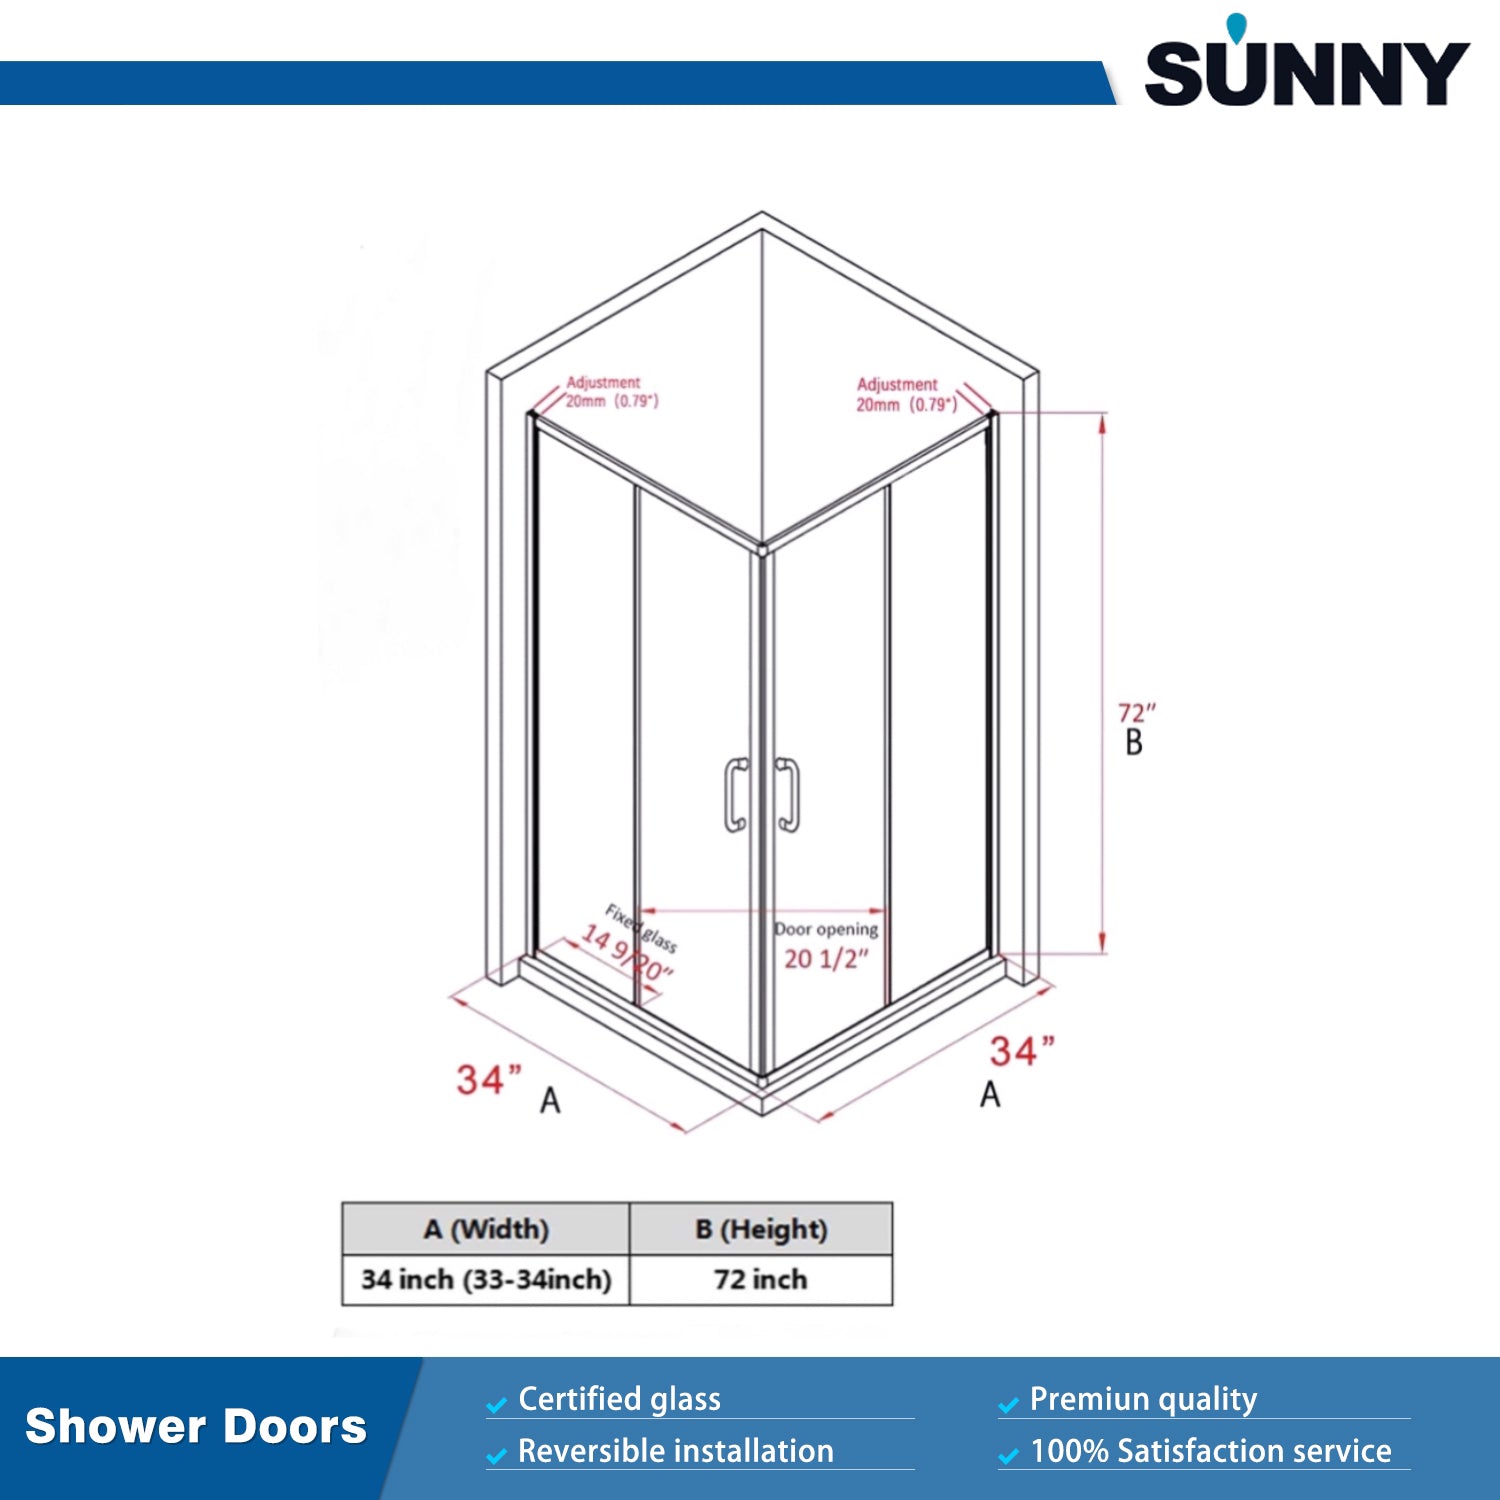 SUNNY SHOWER 34 in. W x 34 in. D x 72 in. H Chrome Finish Corner Entry Enclosure With Sliding Doors Size